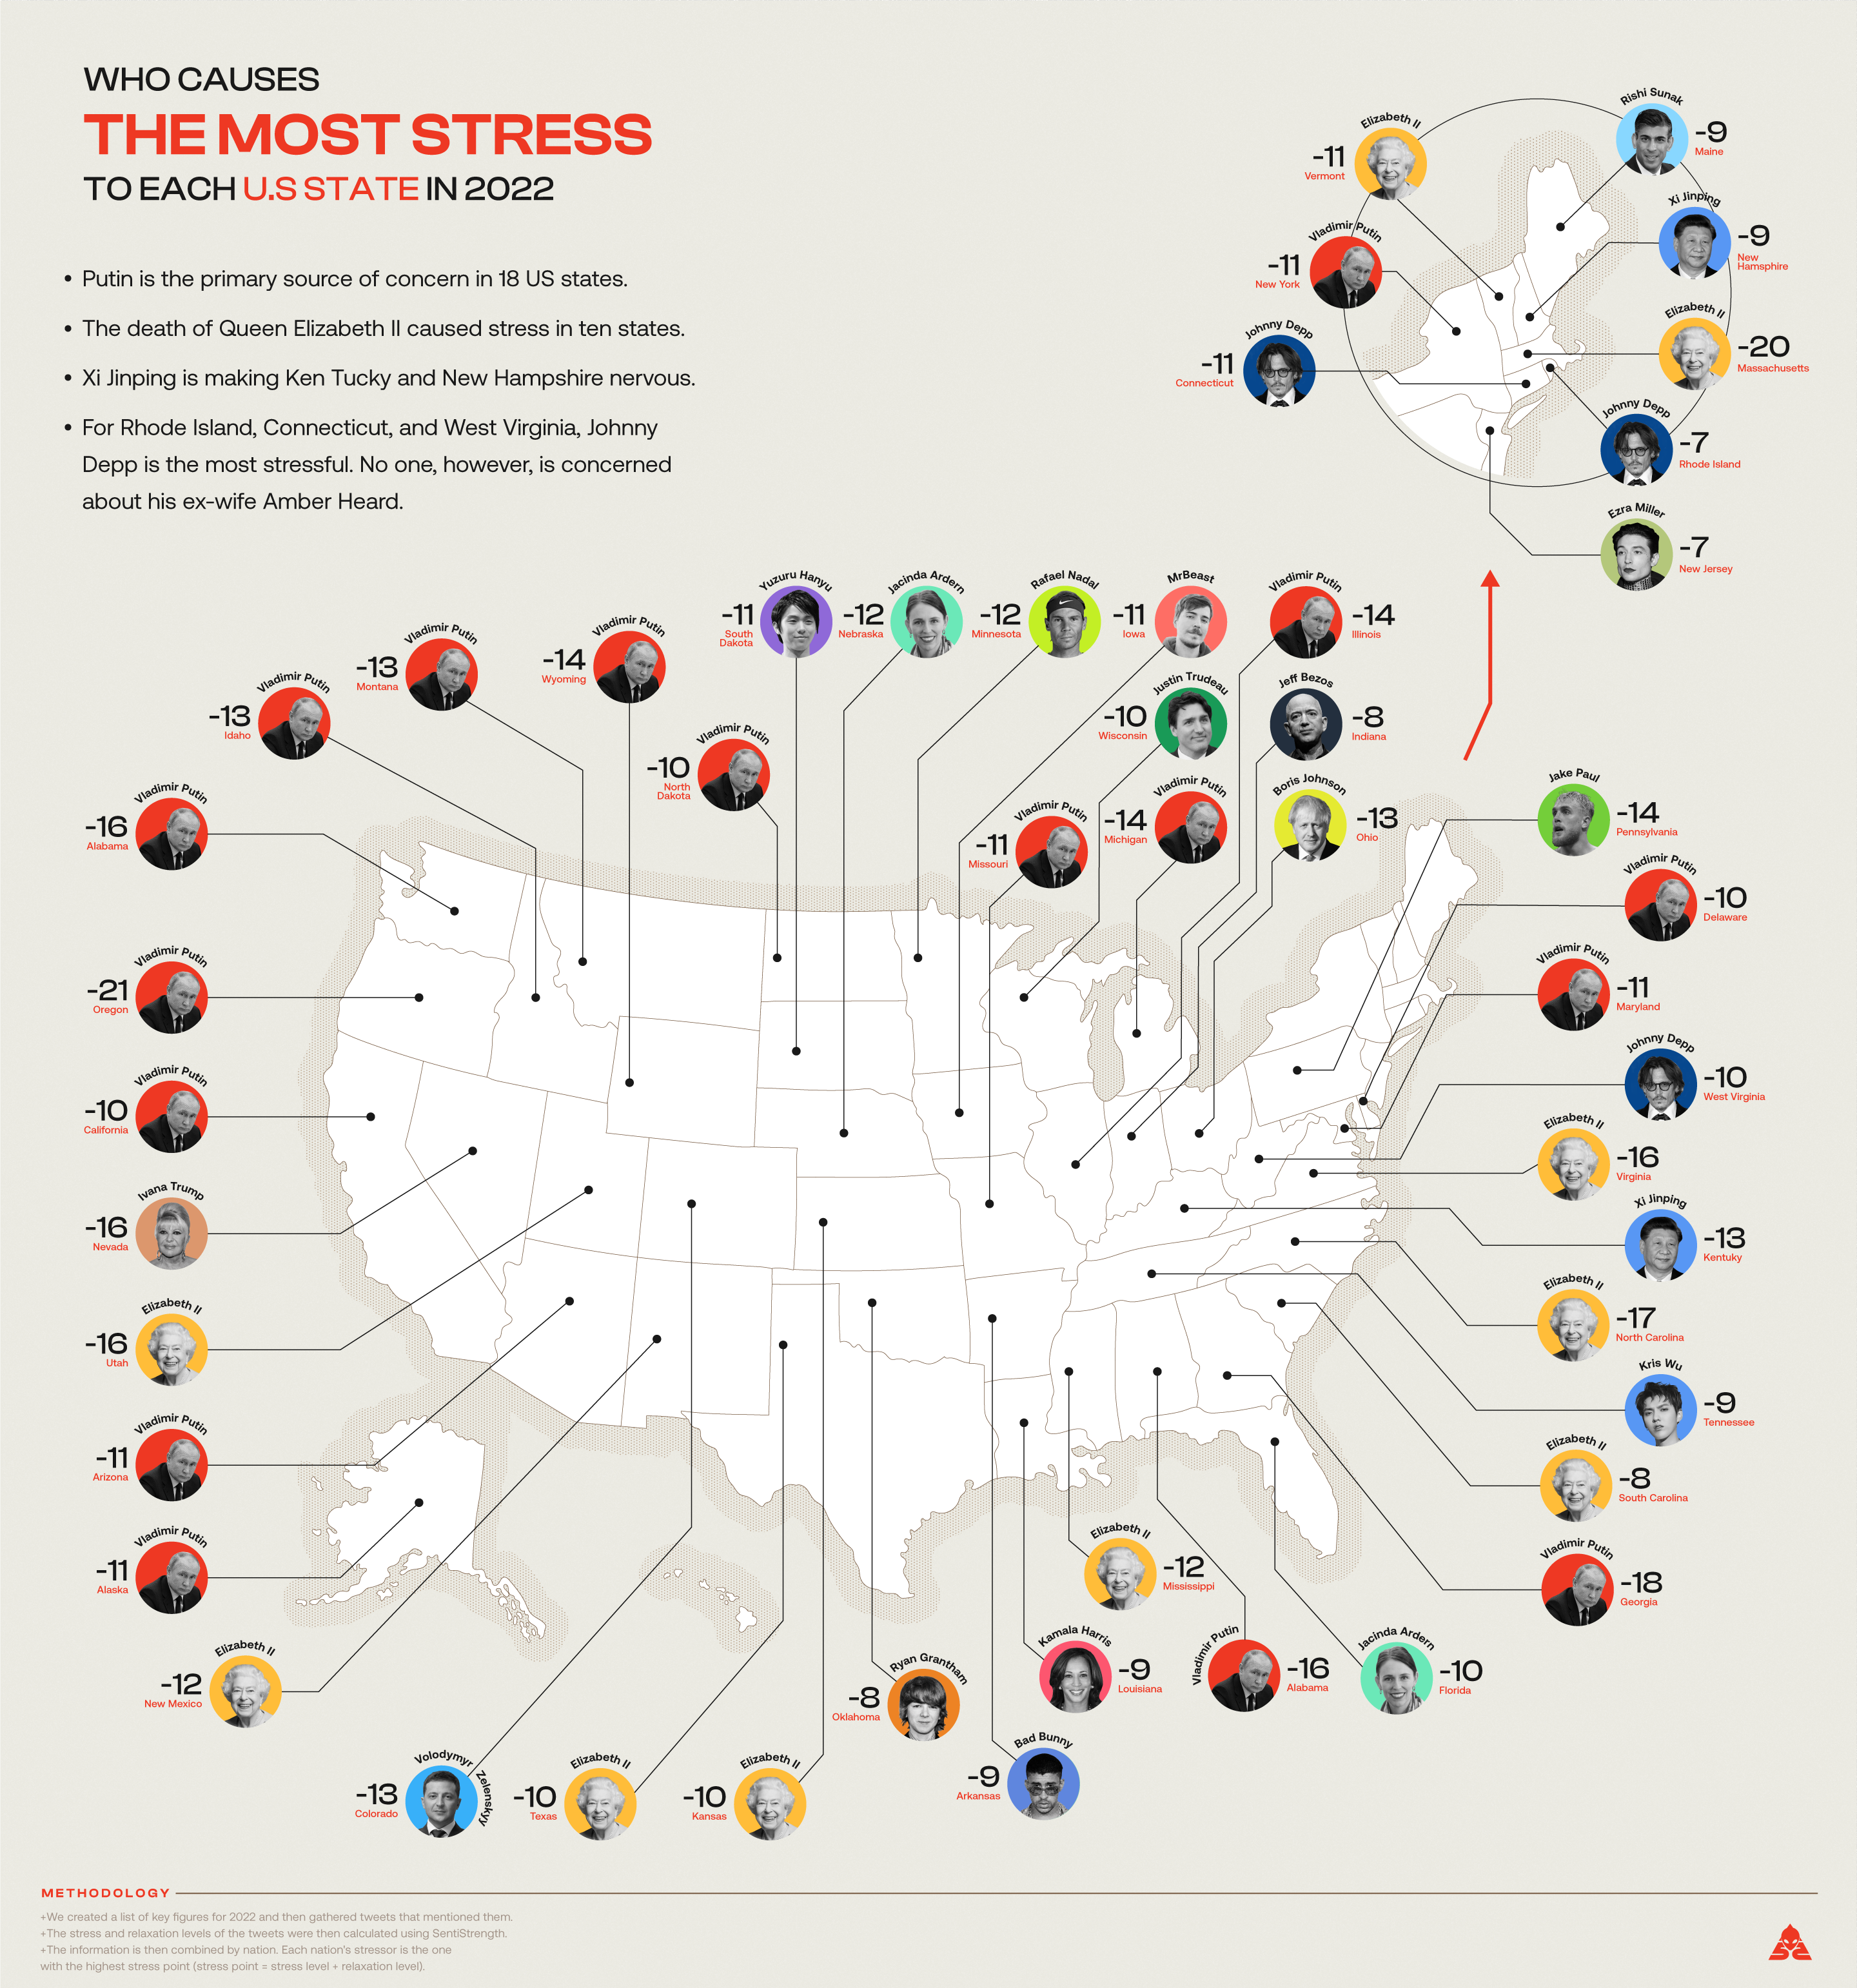 Infographic of who causes the most stress to each state in 2022